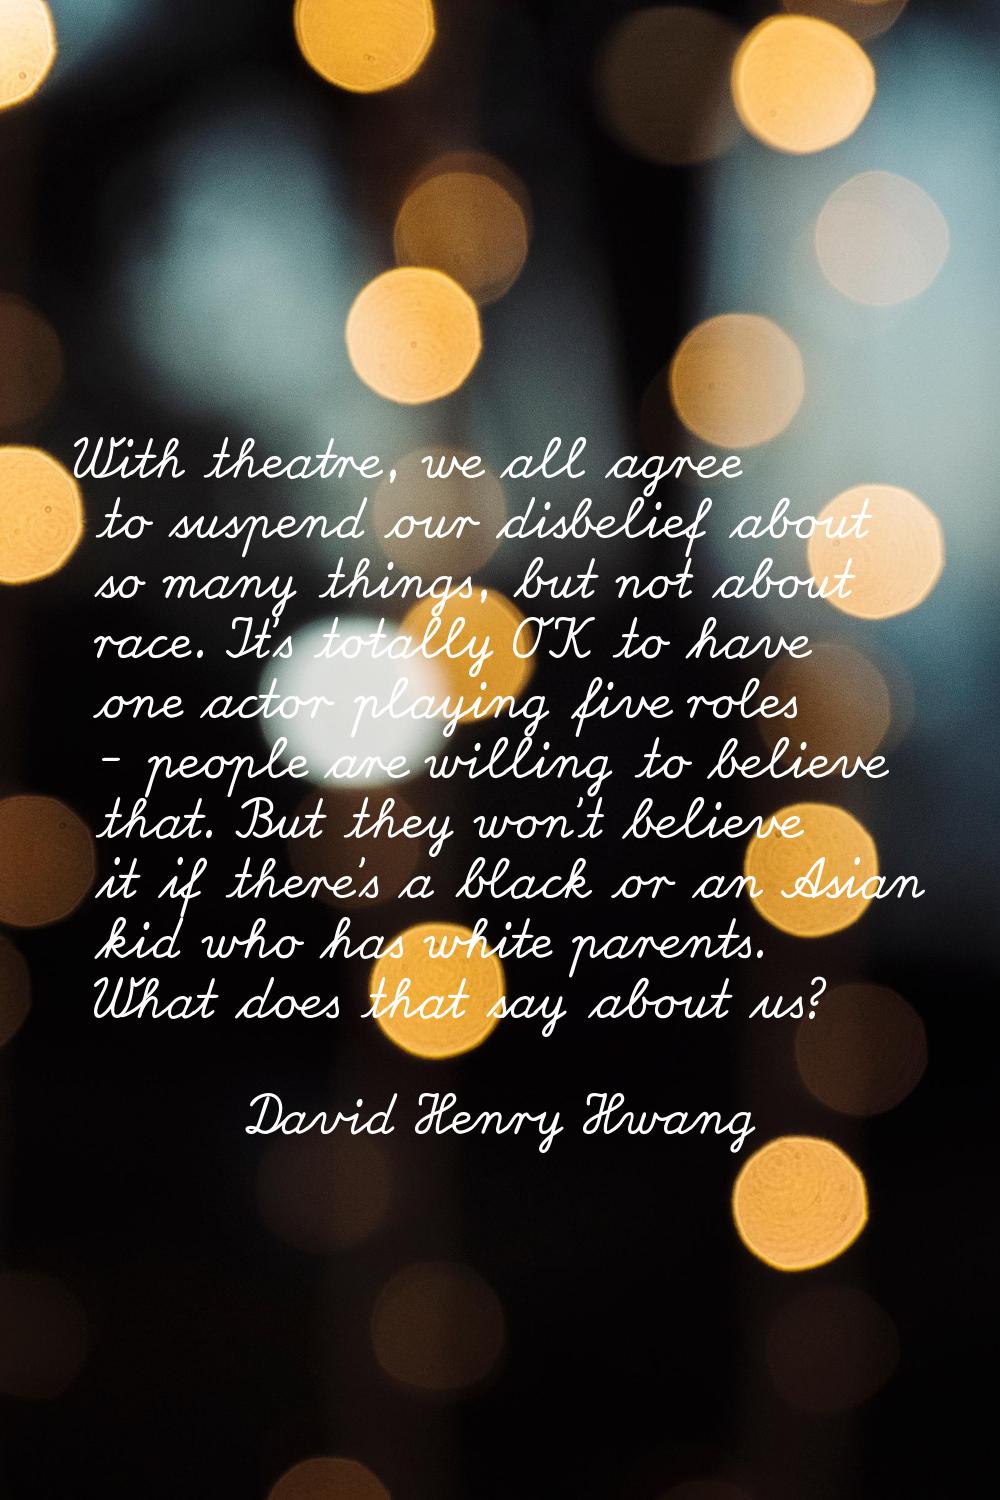 With theatre, we all agree to suspend our disbelief about so many things, but not about race. It's 